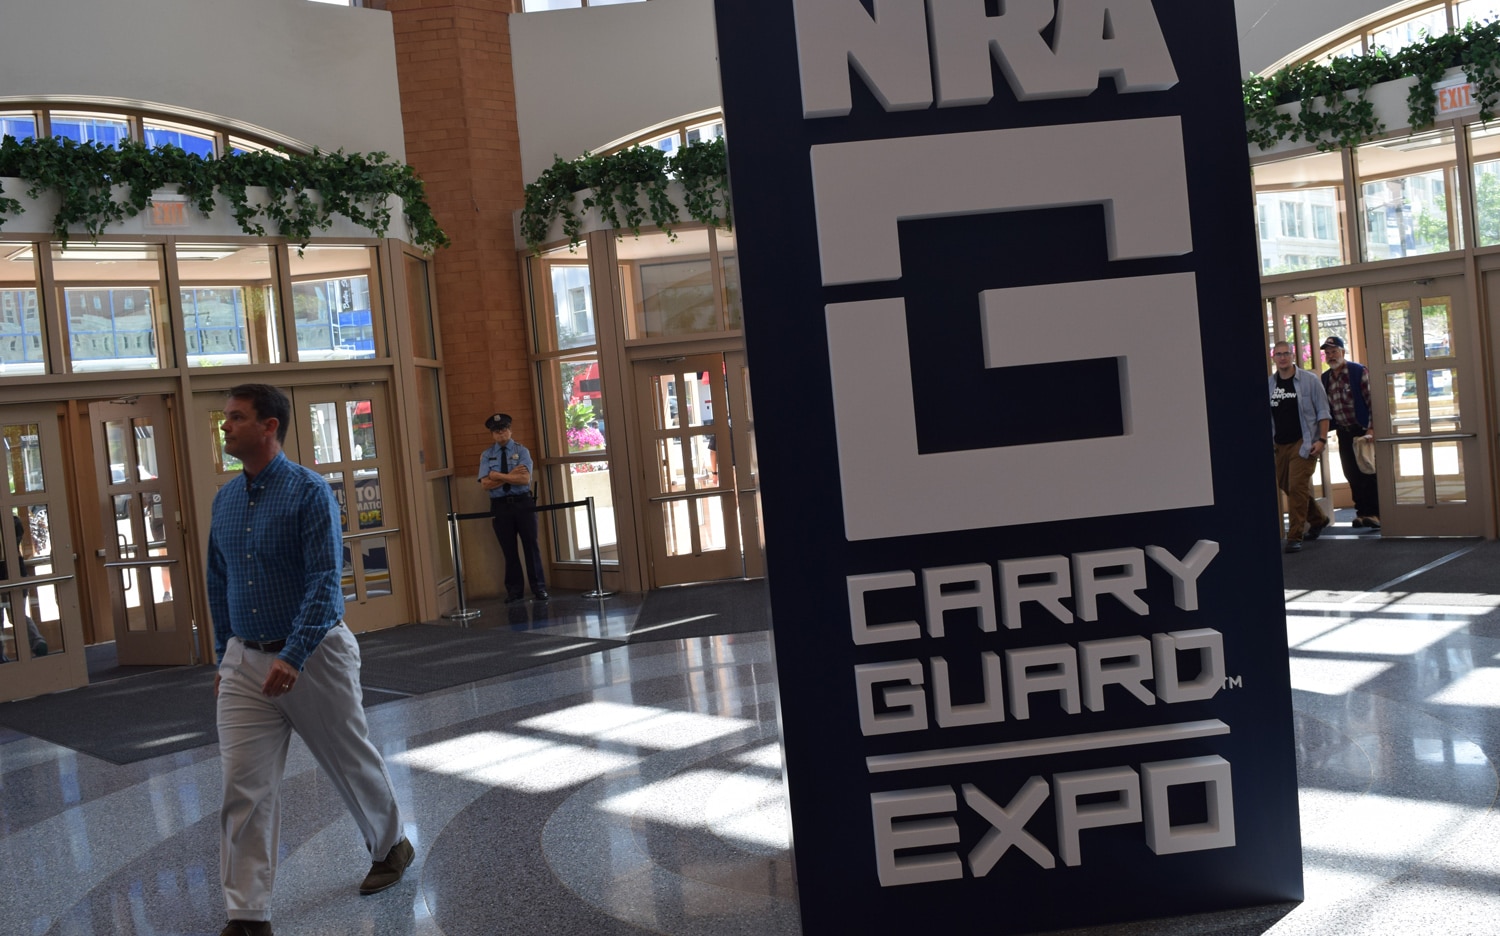 An innocuous sign pointing people toward the expo. (Photo: Daniel Terrill/Guns.com)